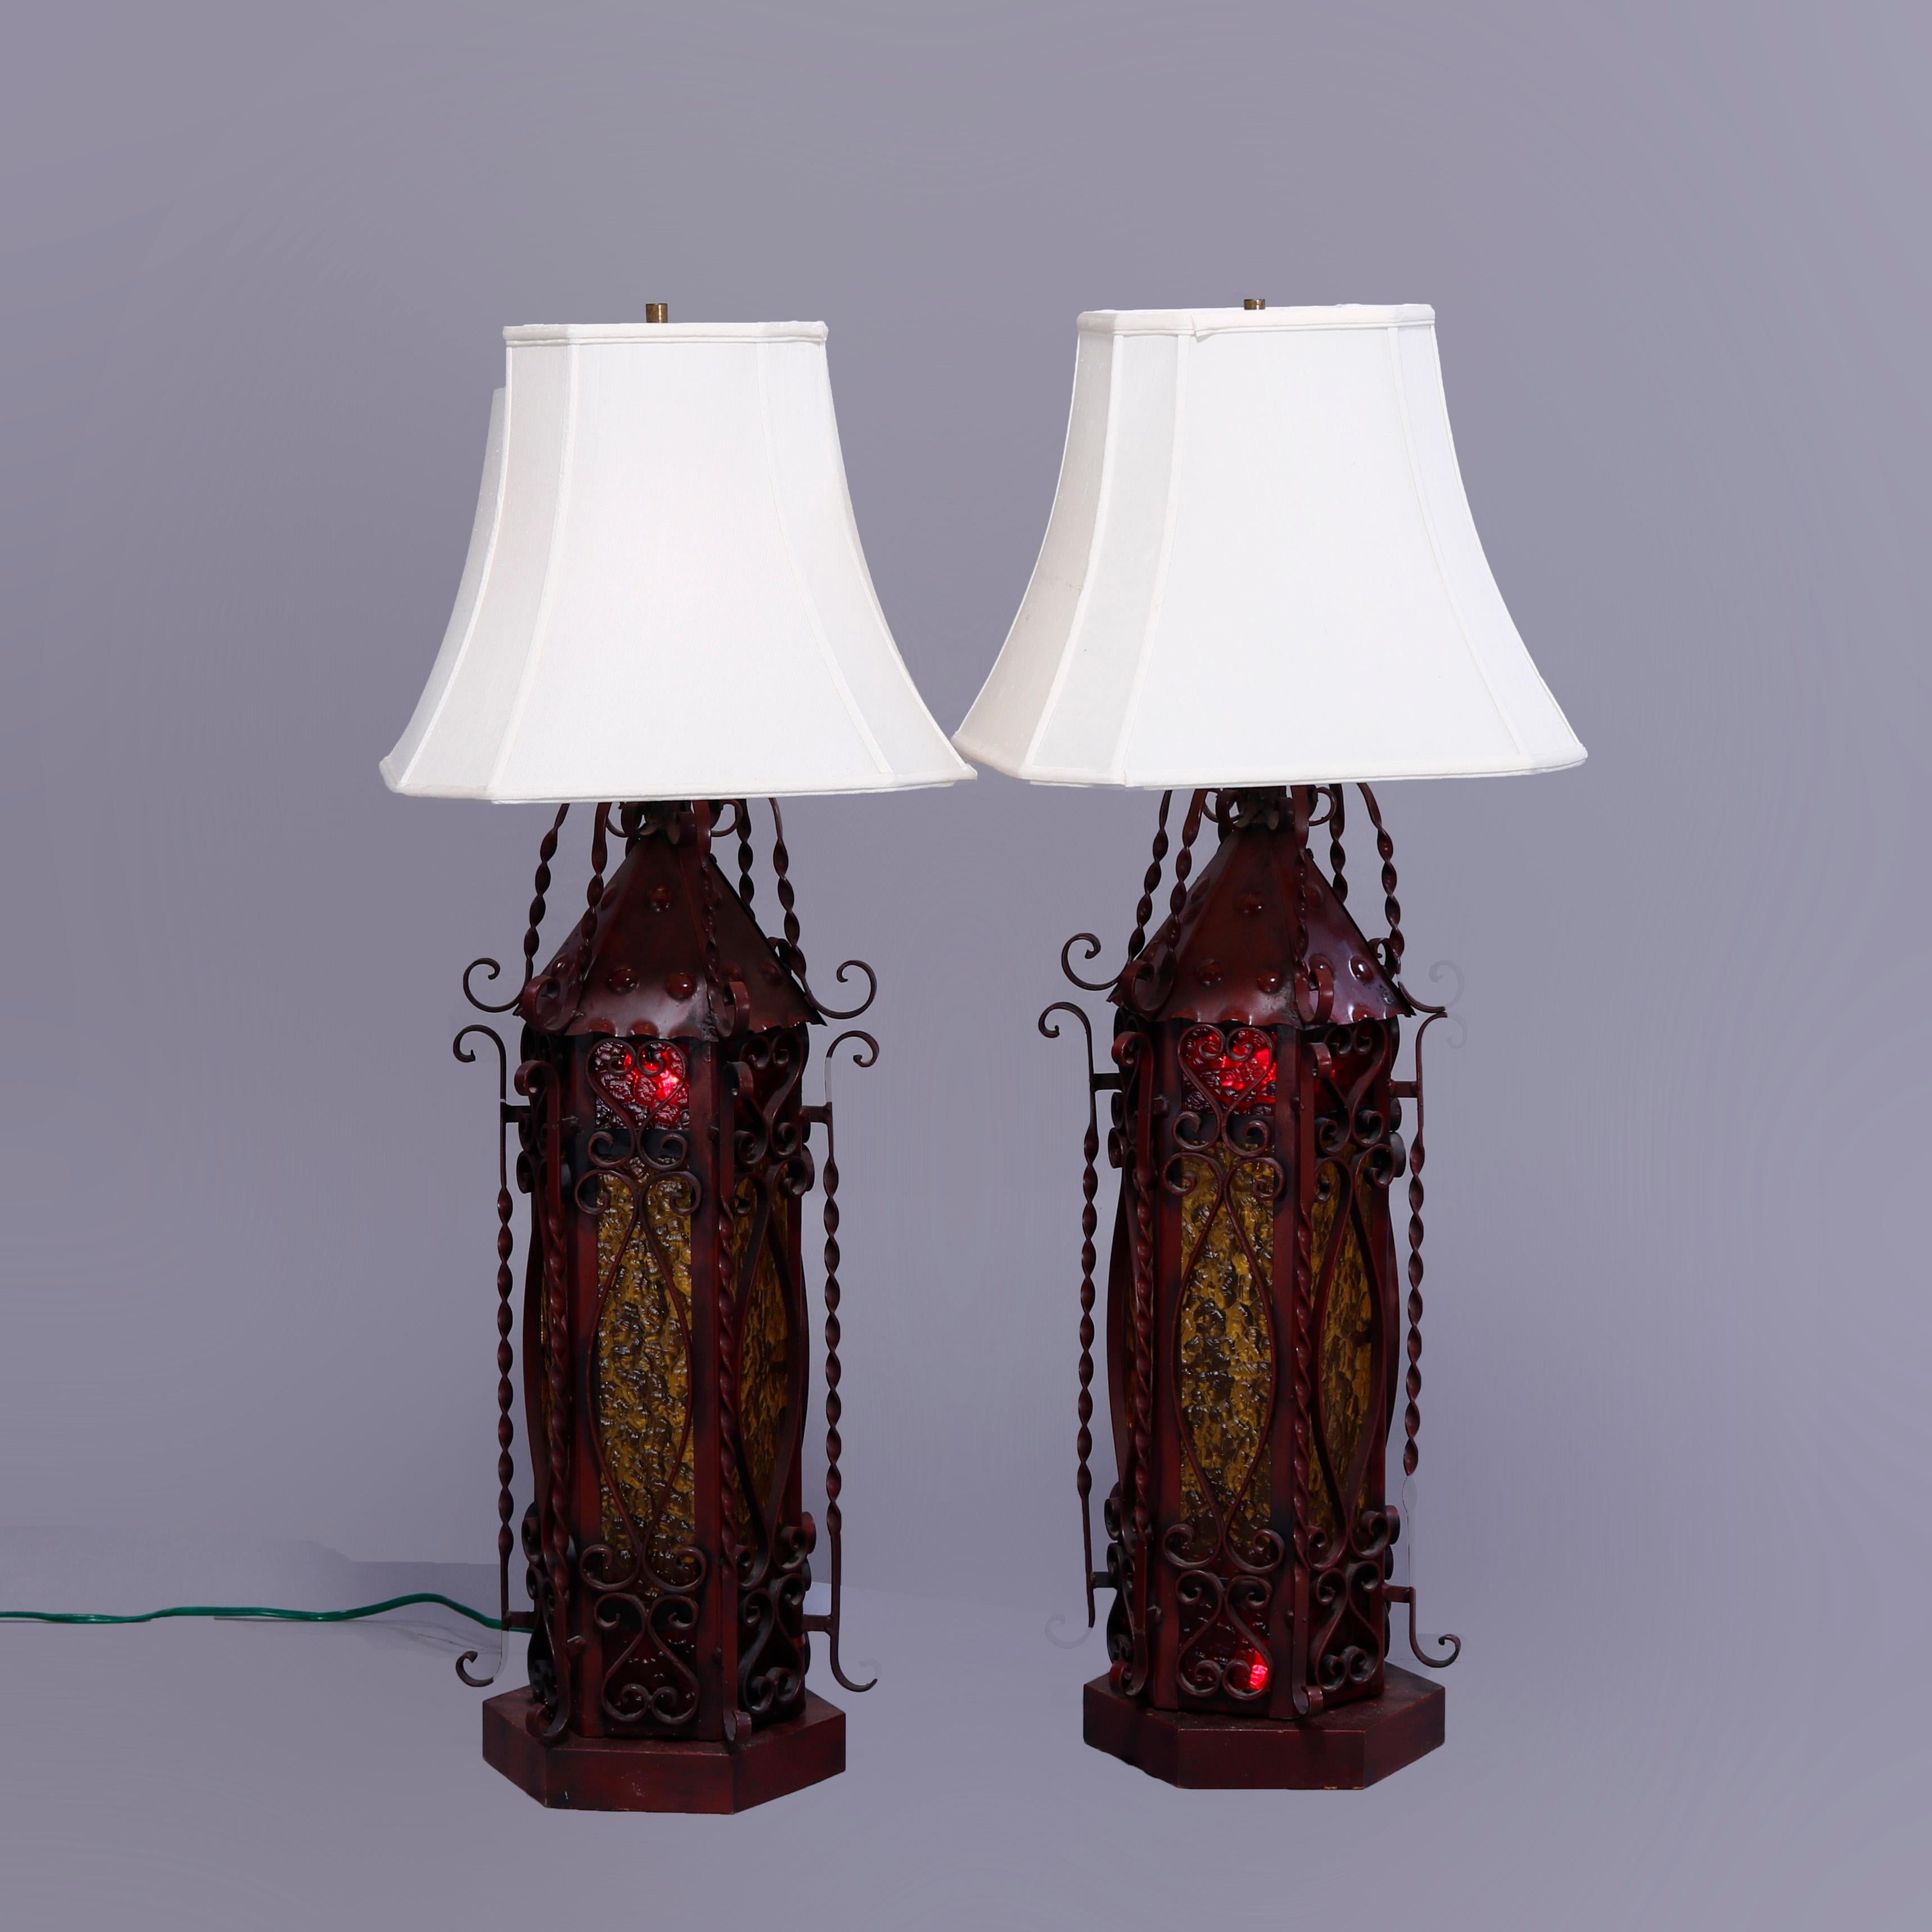 A pair of Spanish style table lamps offer single socket lantern form bases with amber glass in red painted and twisted wrought Iron faceted frames having scroll elements, 20th century

Measures - 43.25''H x 18''W x 18''D.